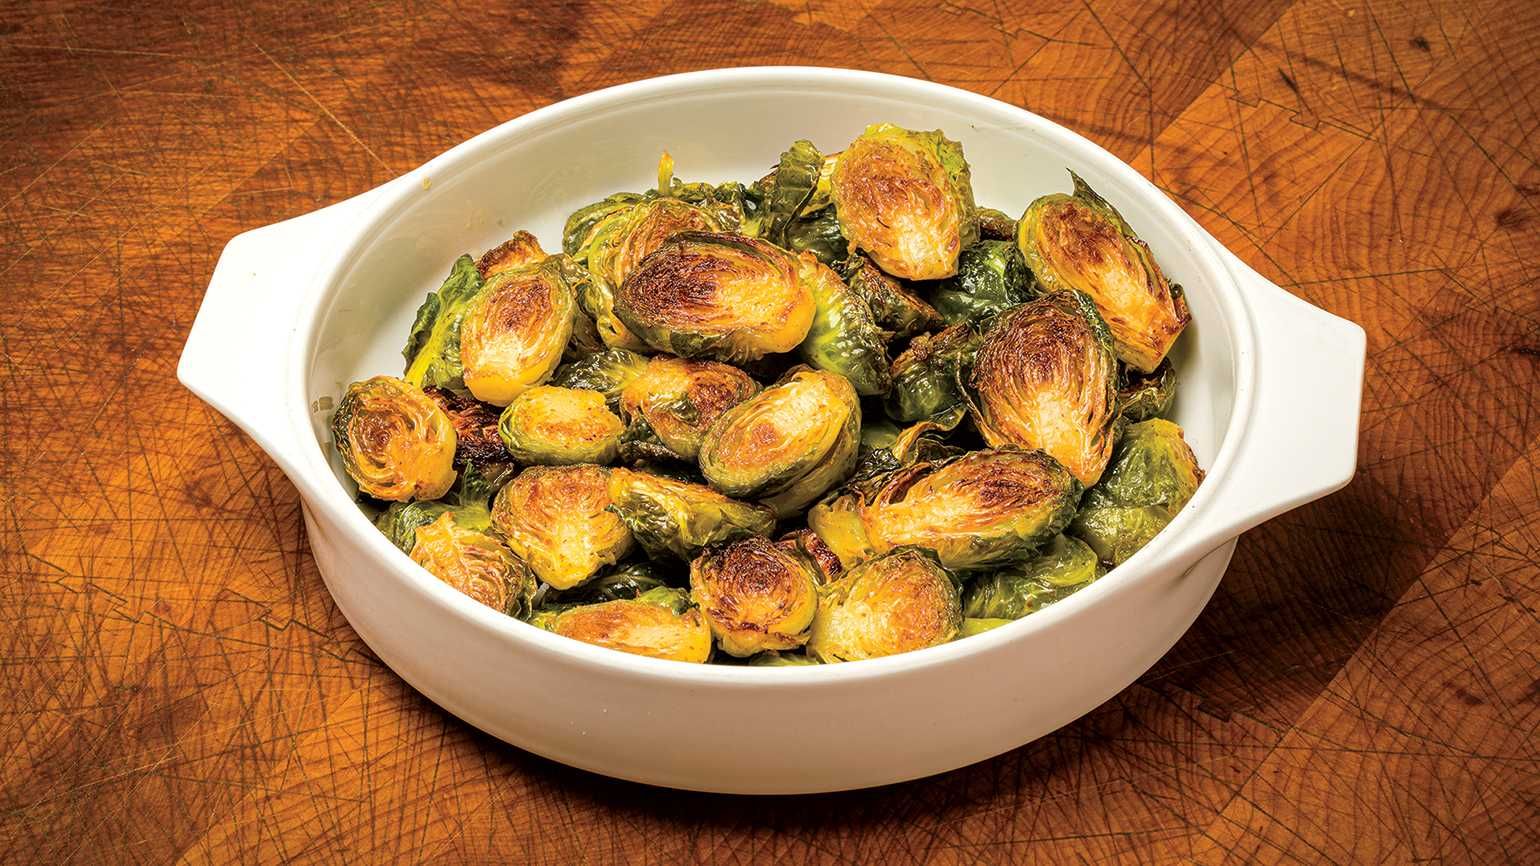 Joy of Cooking Brussels Sprouts (photo by Randy Boverman)